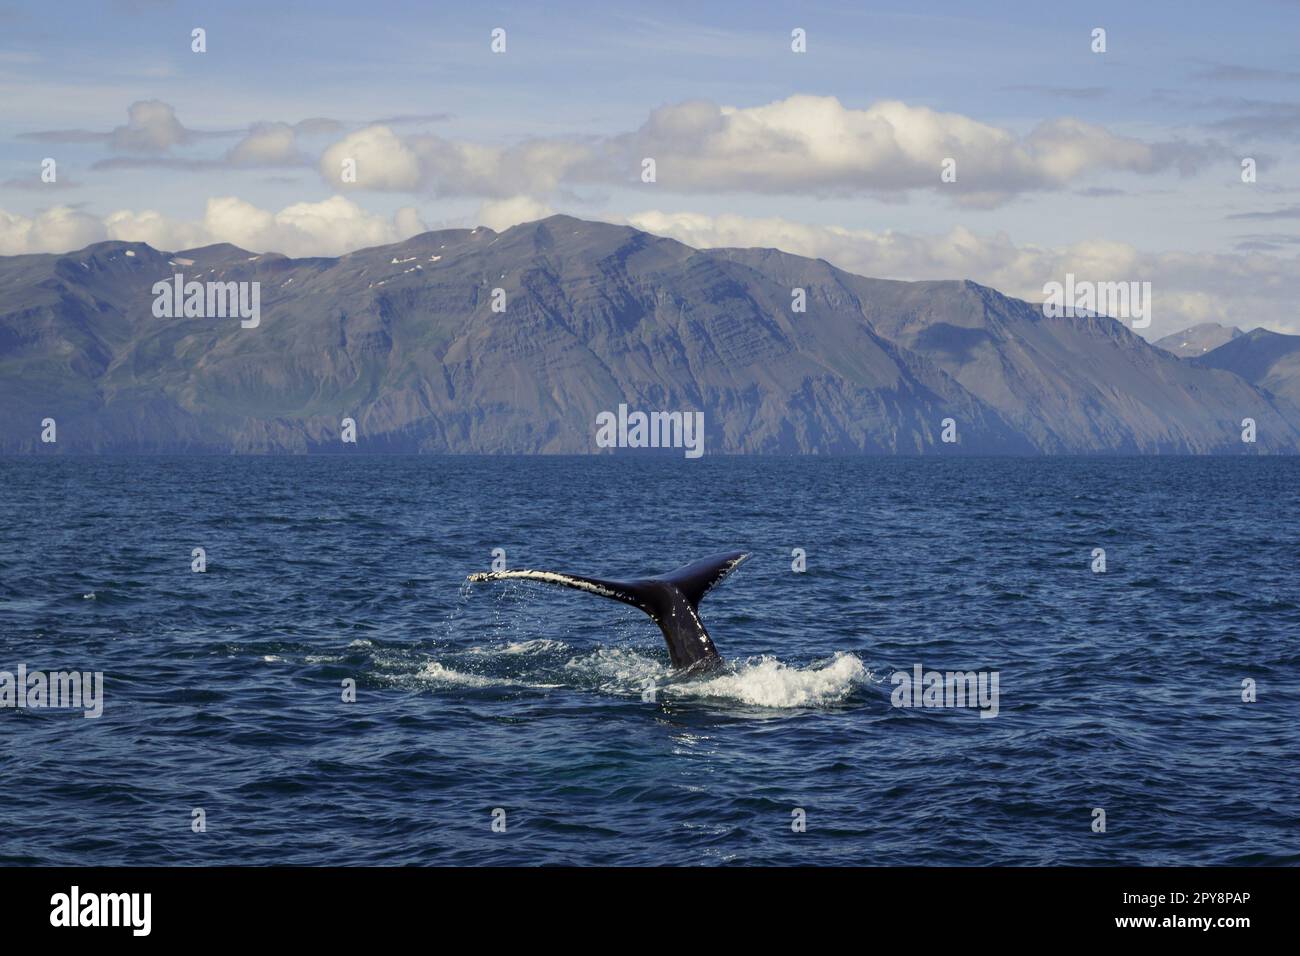 Large tail of killer whale in water landscape photo Stock Photo